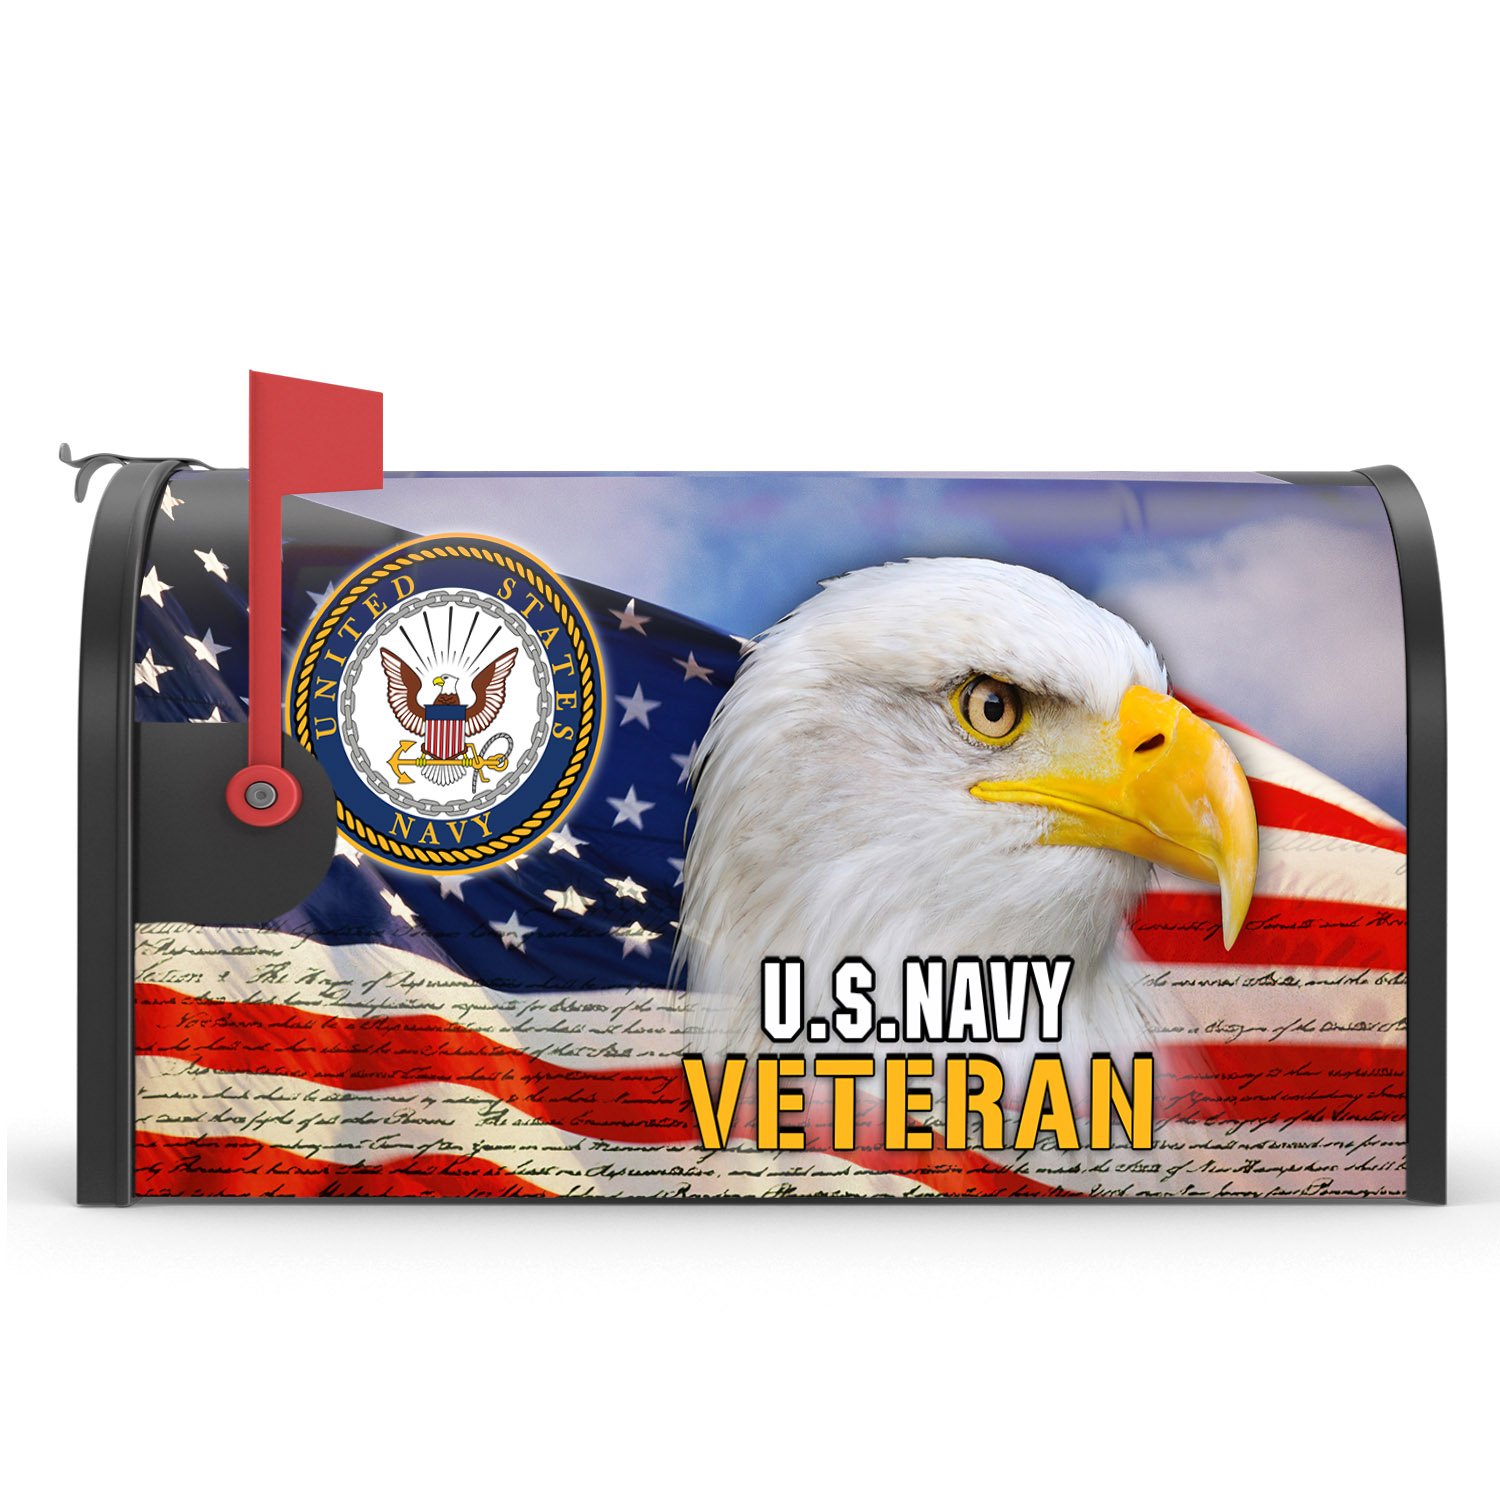 U.S. Navy Veteran Eagle Mailbox Cover Magnetic MLN676MBCT